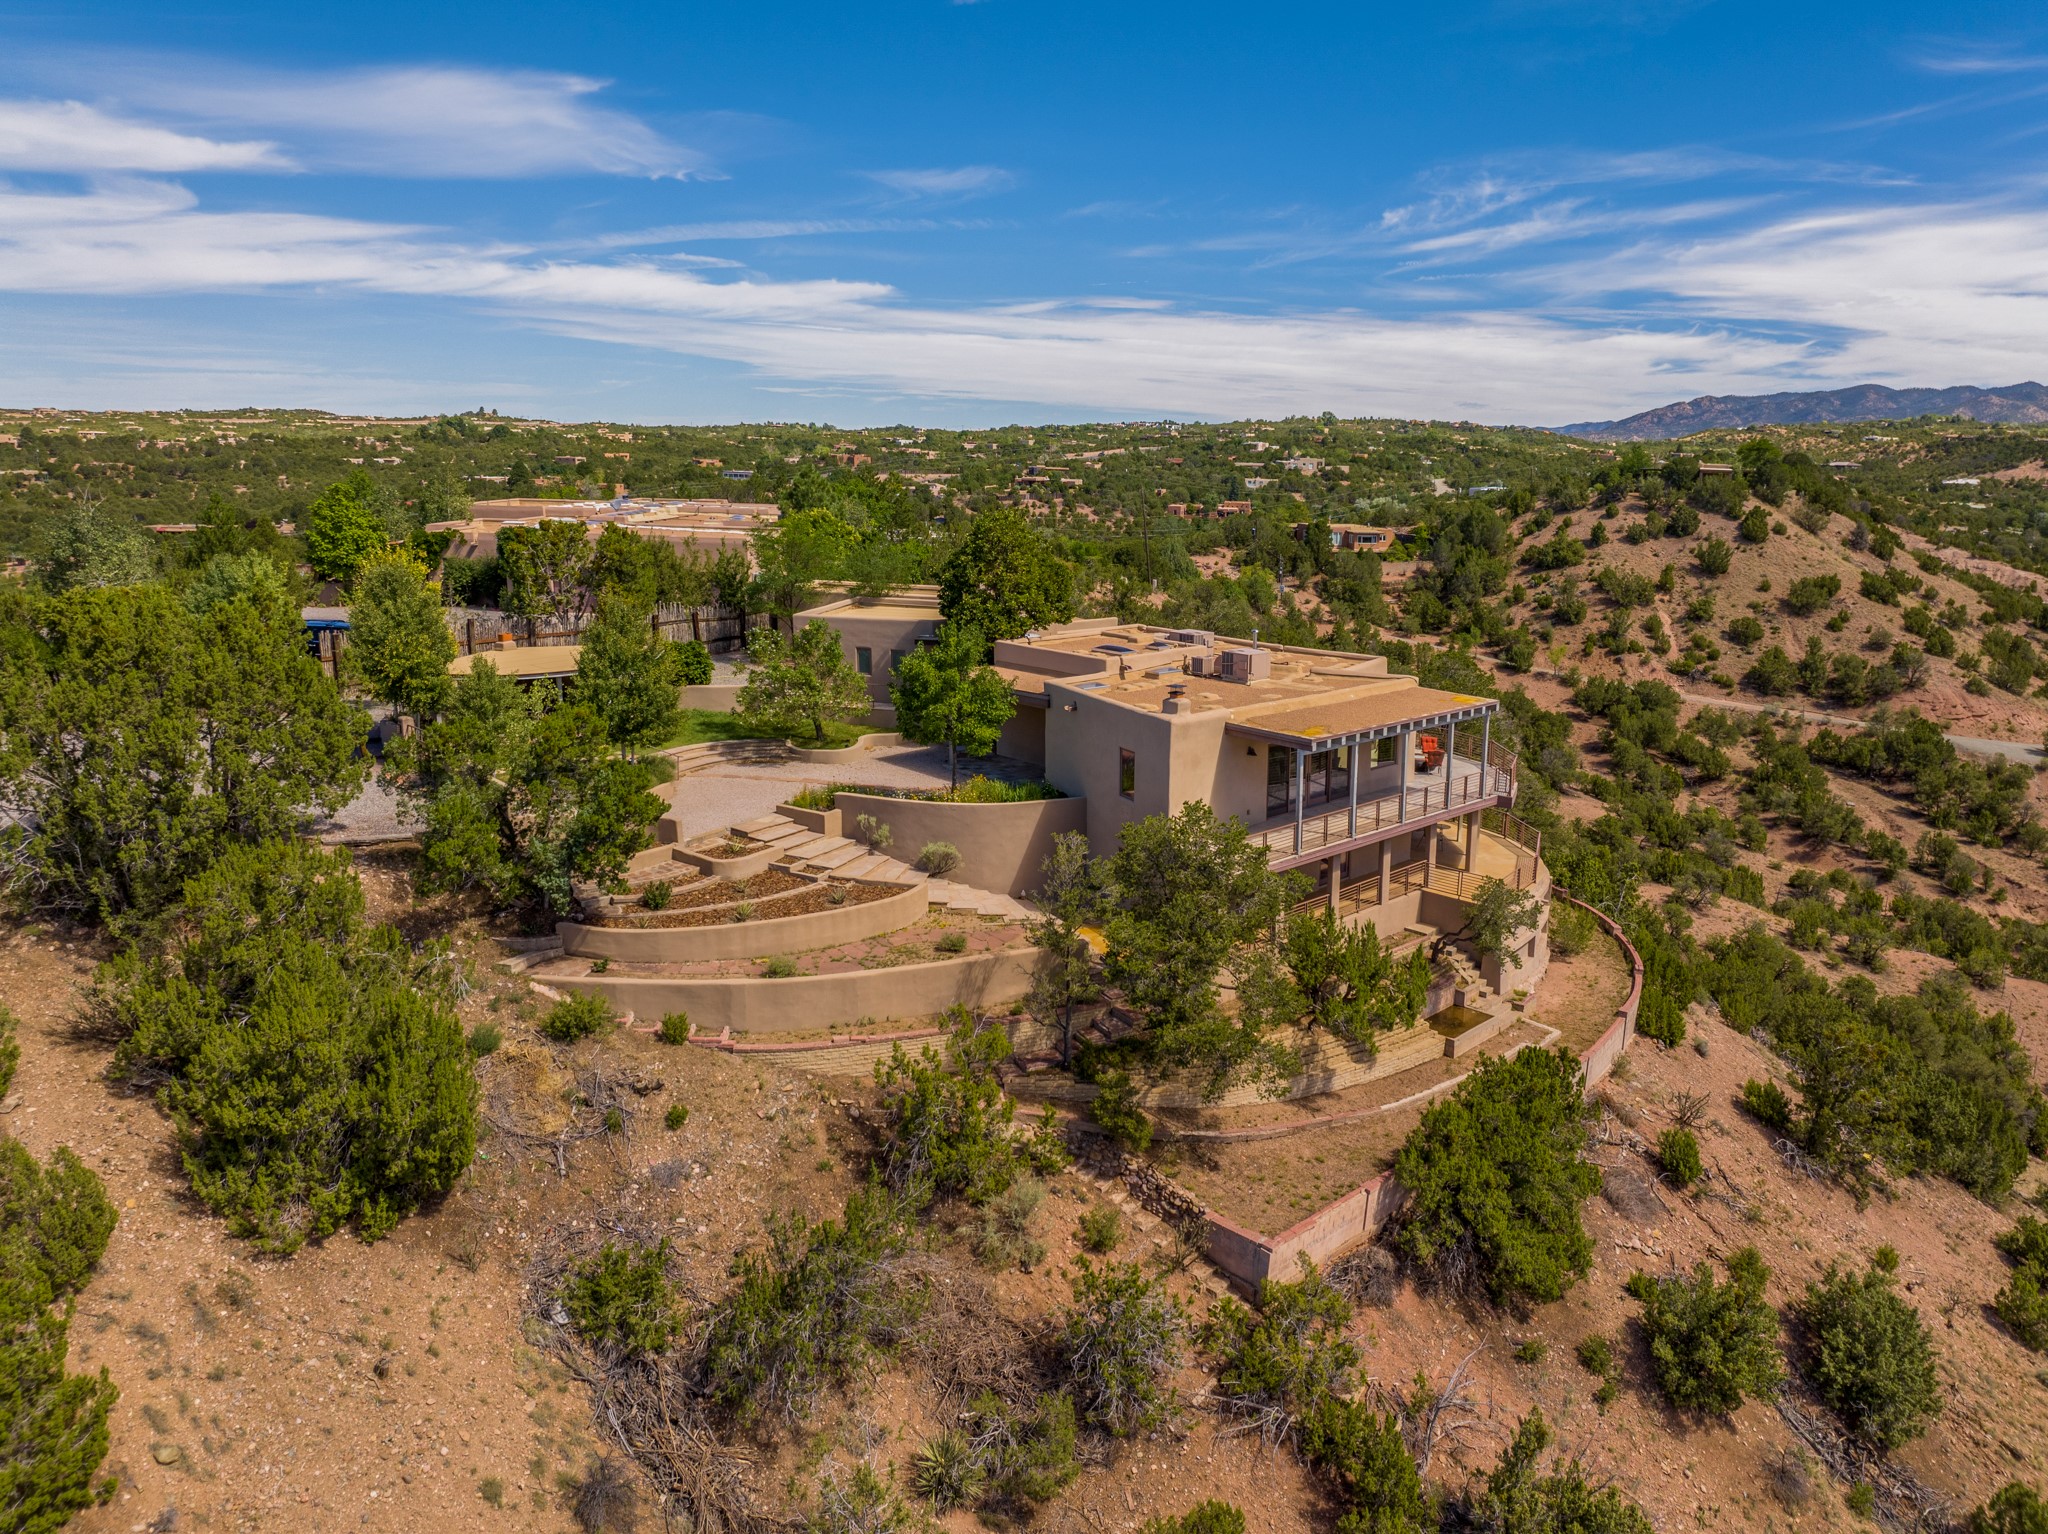 1000 Hillcrest Drive, Santa Fe, New Mexico 87501, 4 Bedrooms Bedrooms, ,5 BathroomsBathrooms,Residential,For Sale,1000 Hillcrest Drive,202400923